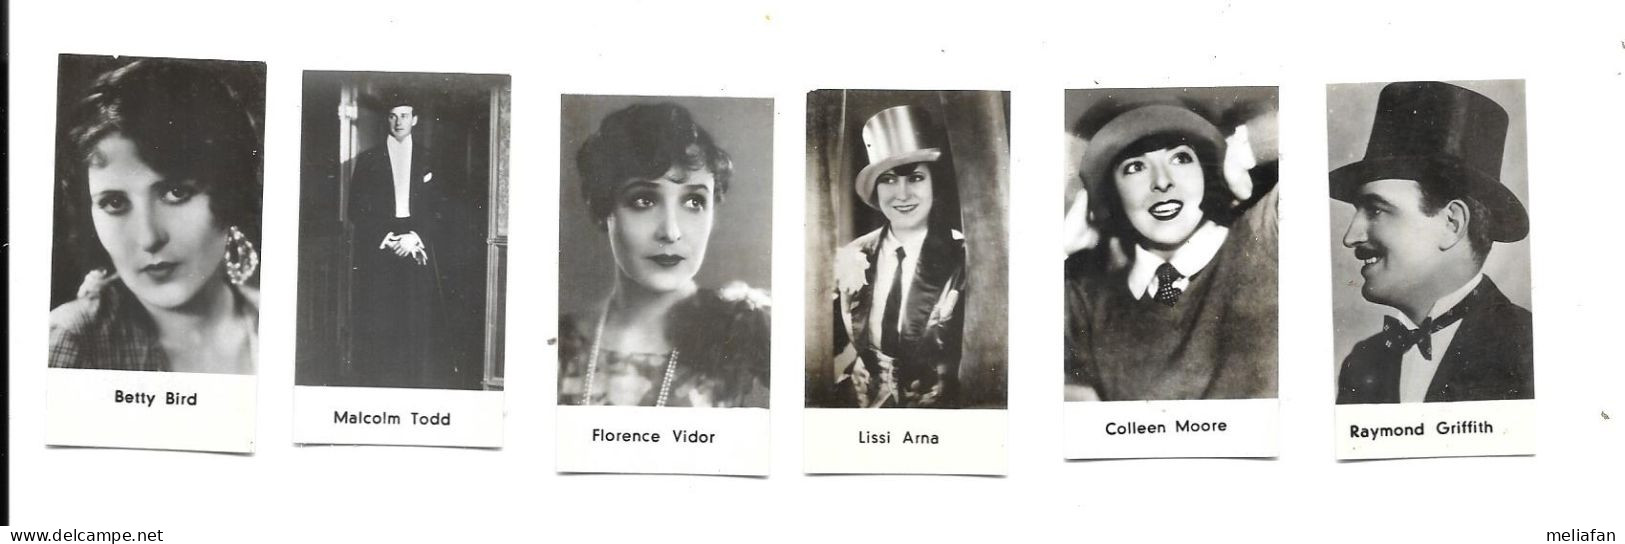 DV06 - VIGNETTES PHOTO - BETTY BIRD - COLLEEN MOORE - LISSI ARNA - RAYMOND GRIFFITH - FLORENCE VIDOR - MALCOLM TODD - Foto